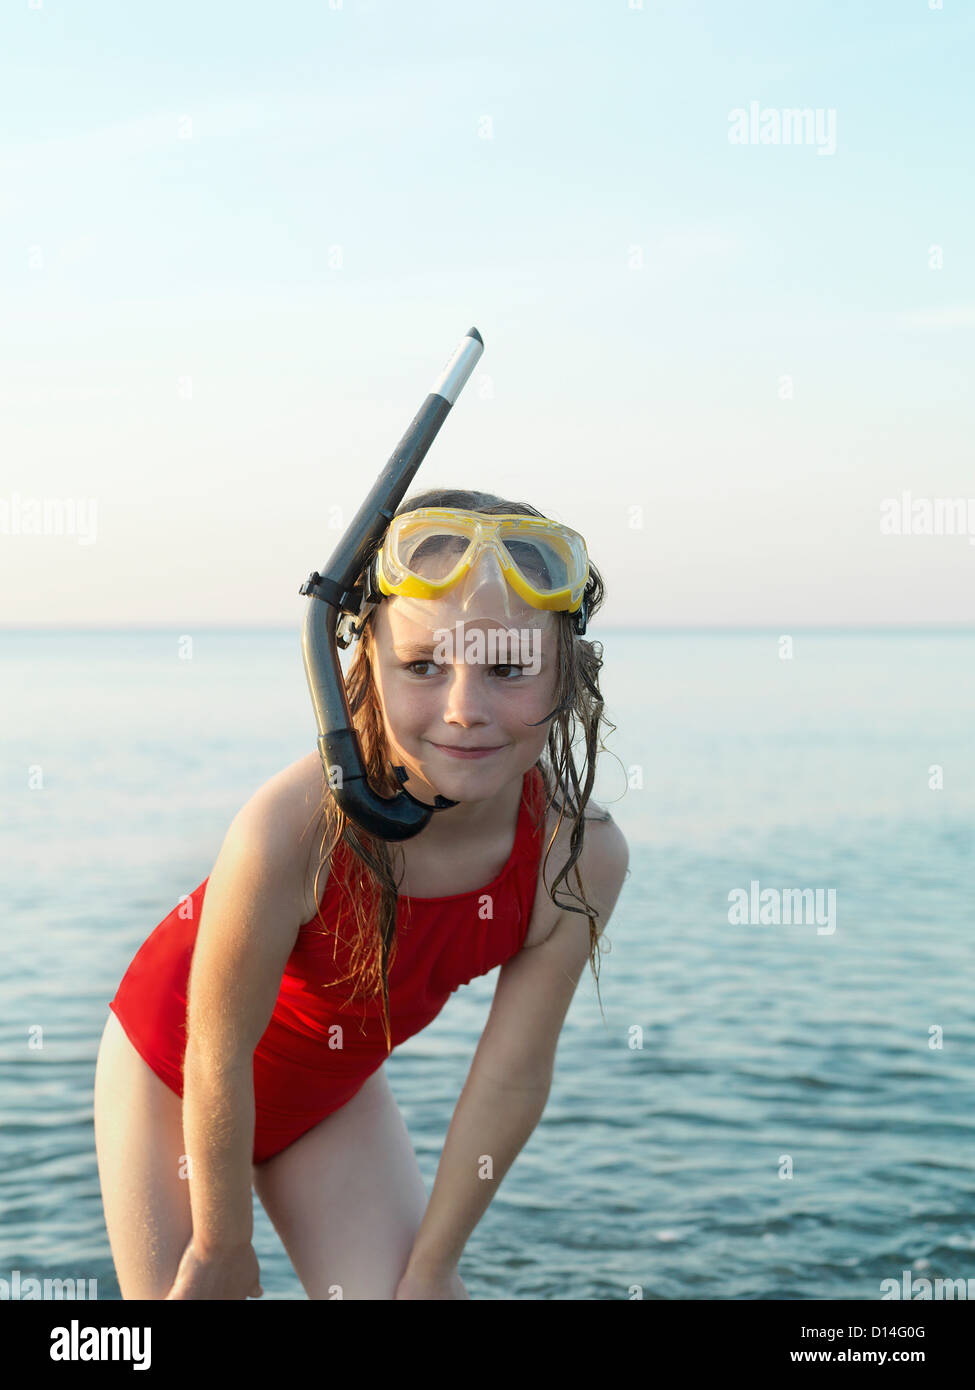 Girl wearing snorkel and mask in water Stock Photo